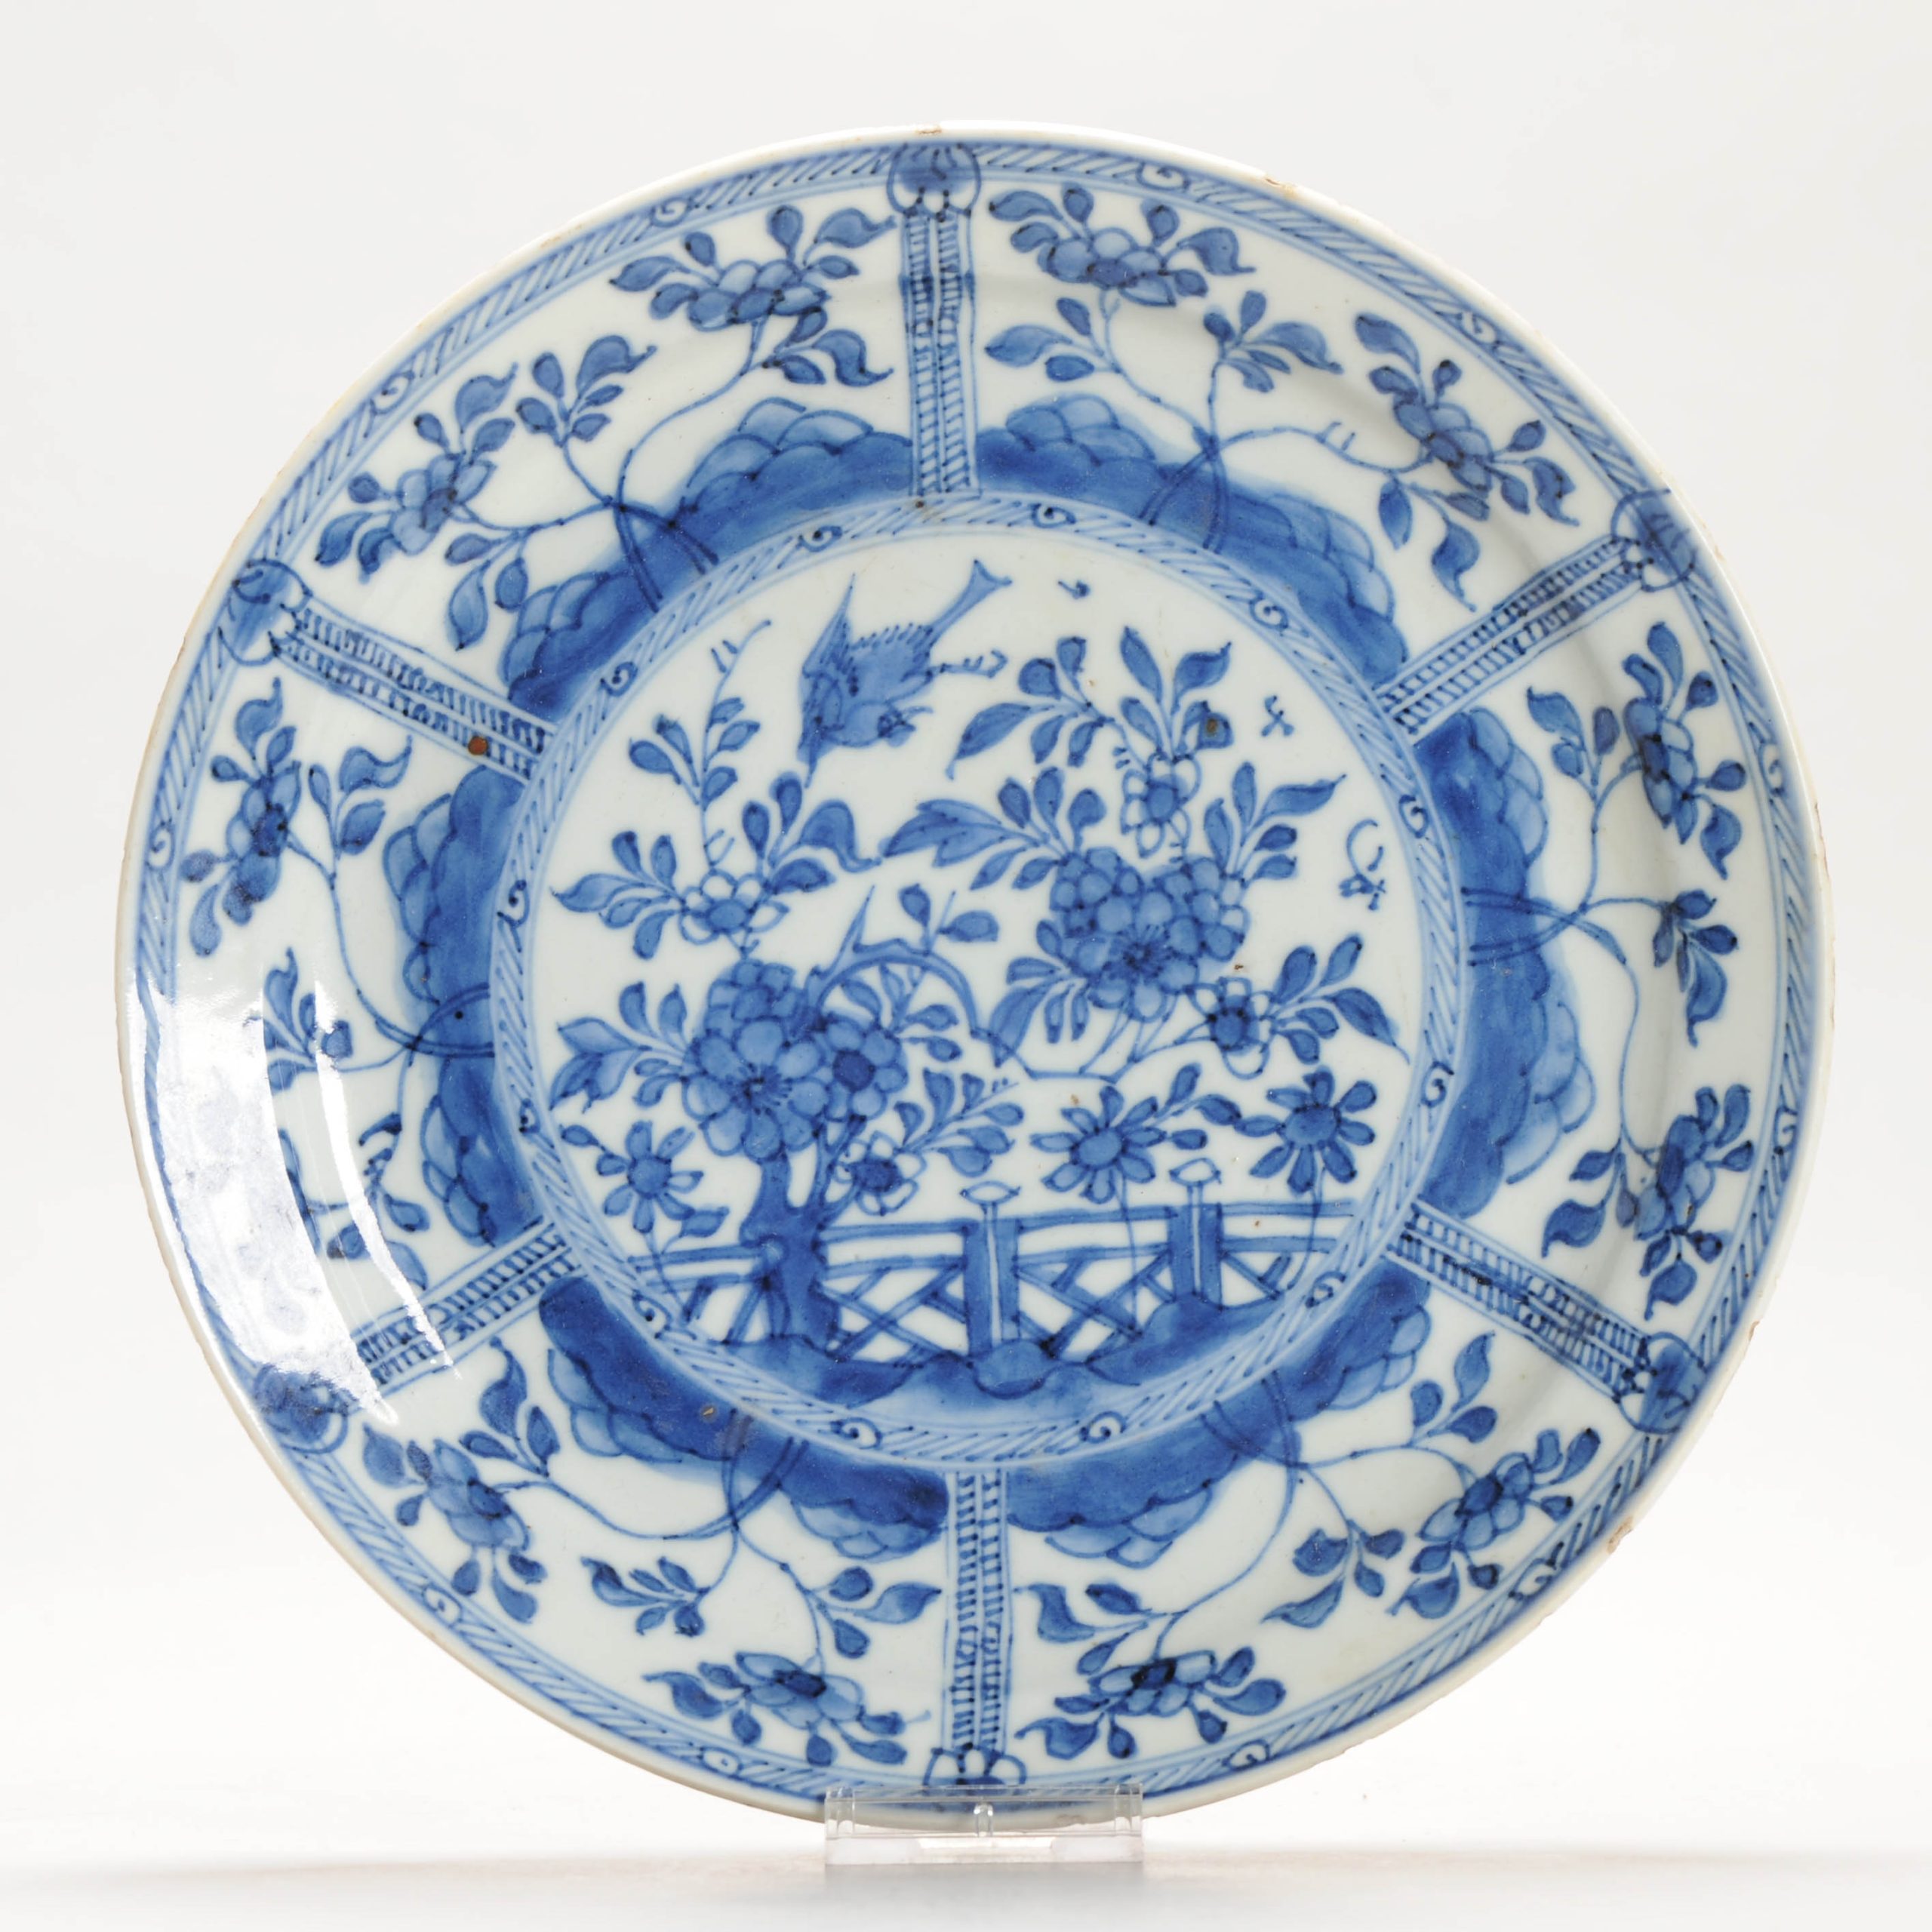 1317 Interesting Dish With a Garden Scene and a unmarked Base